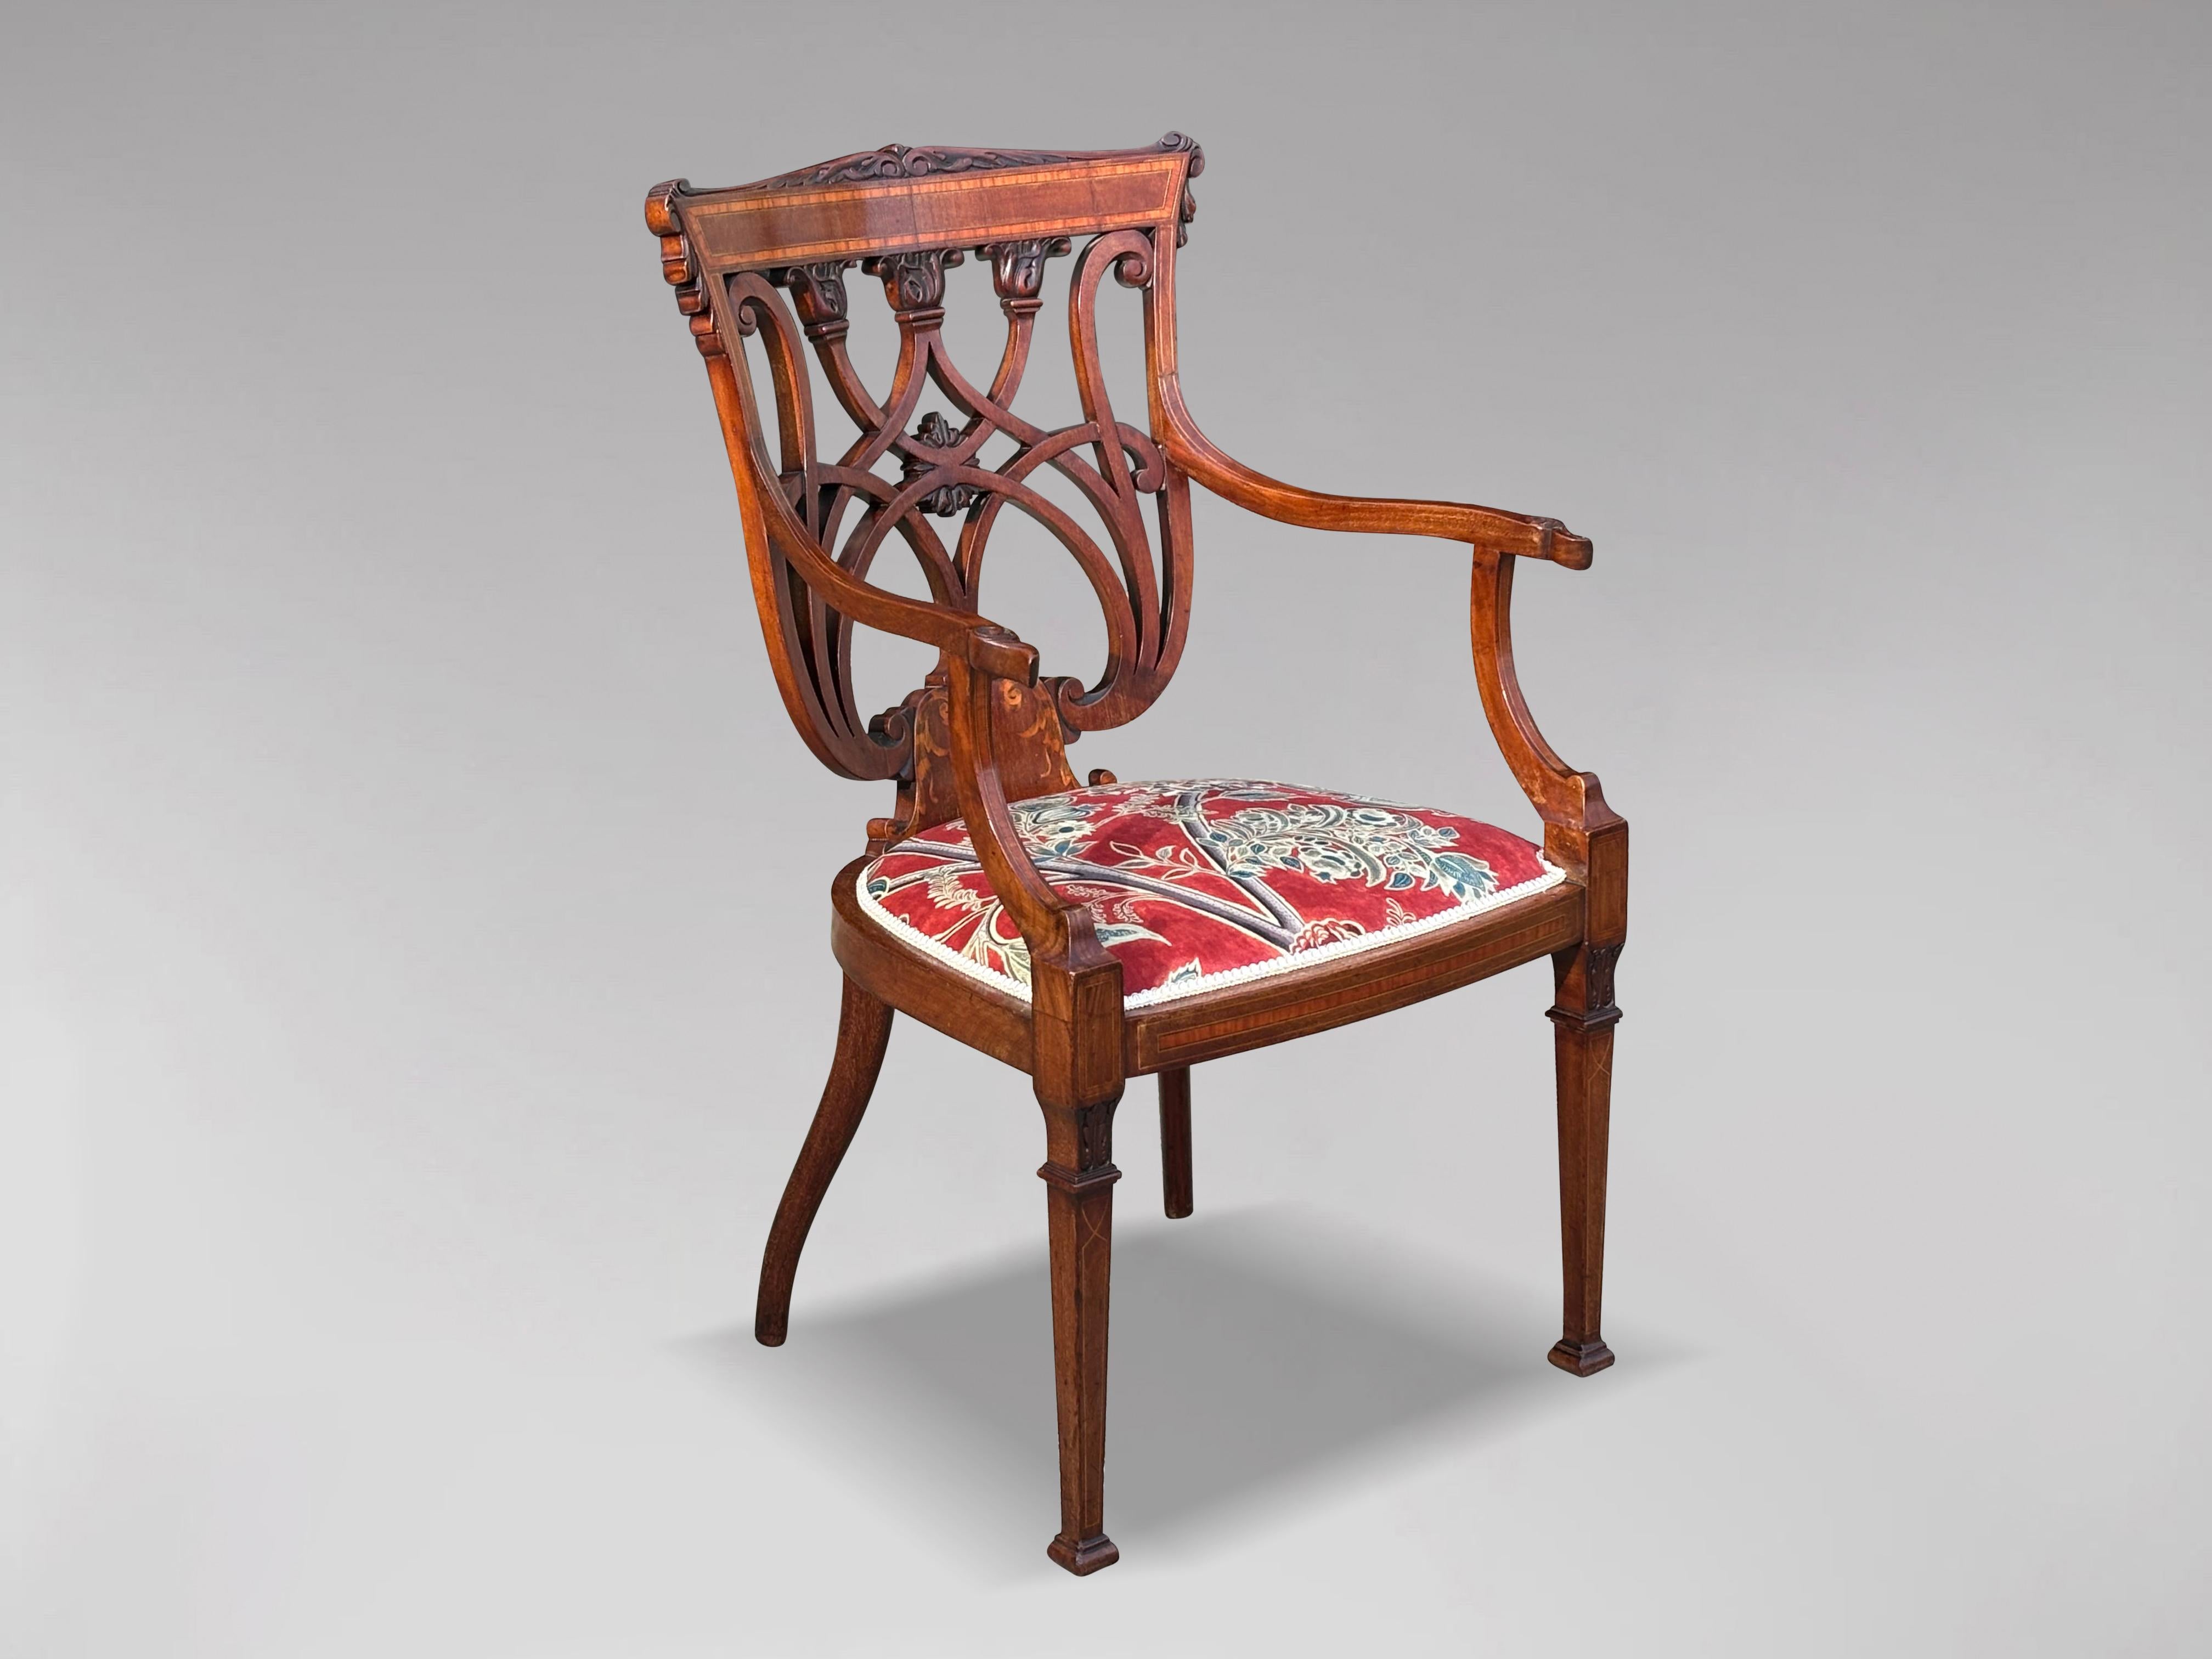 A fine quality antique Edwardian period marquetry inlaid occasional armchair. Made from solid mahogany with a curved rosewood and satinwood inlaid top back rail, above carved pierced fretwork to the back. The back connects to shaped arms, raised on